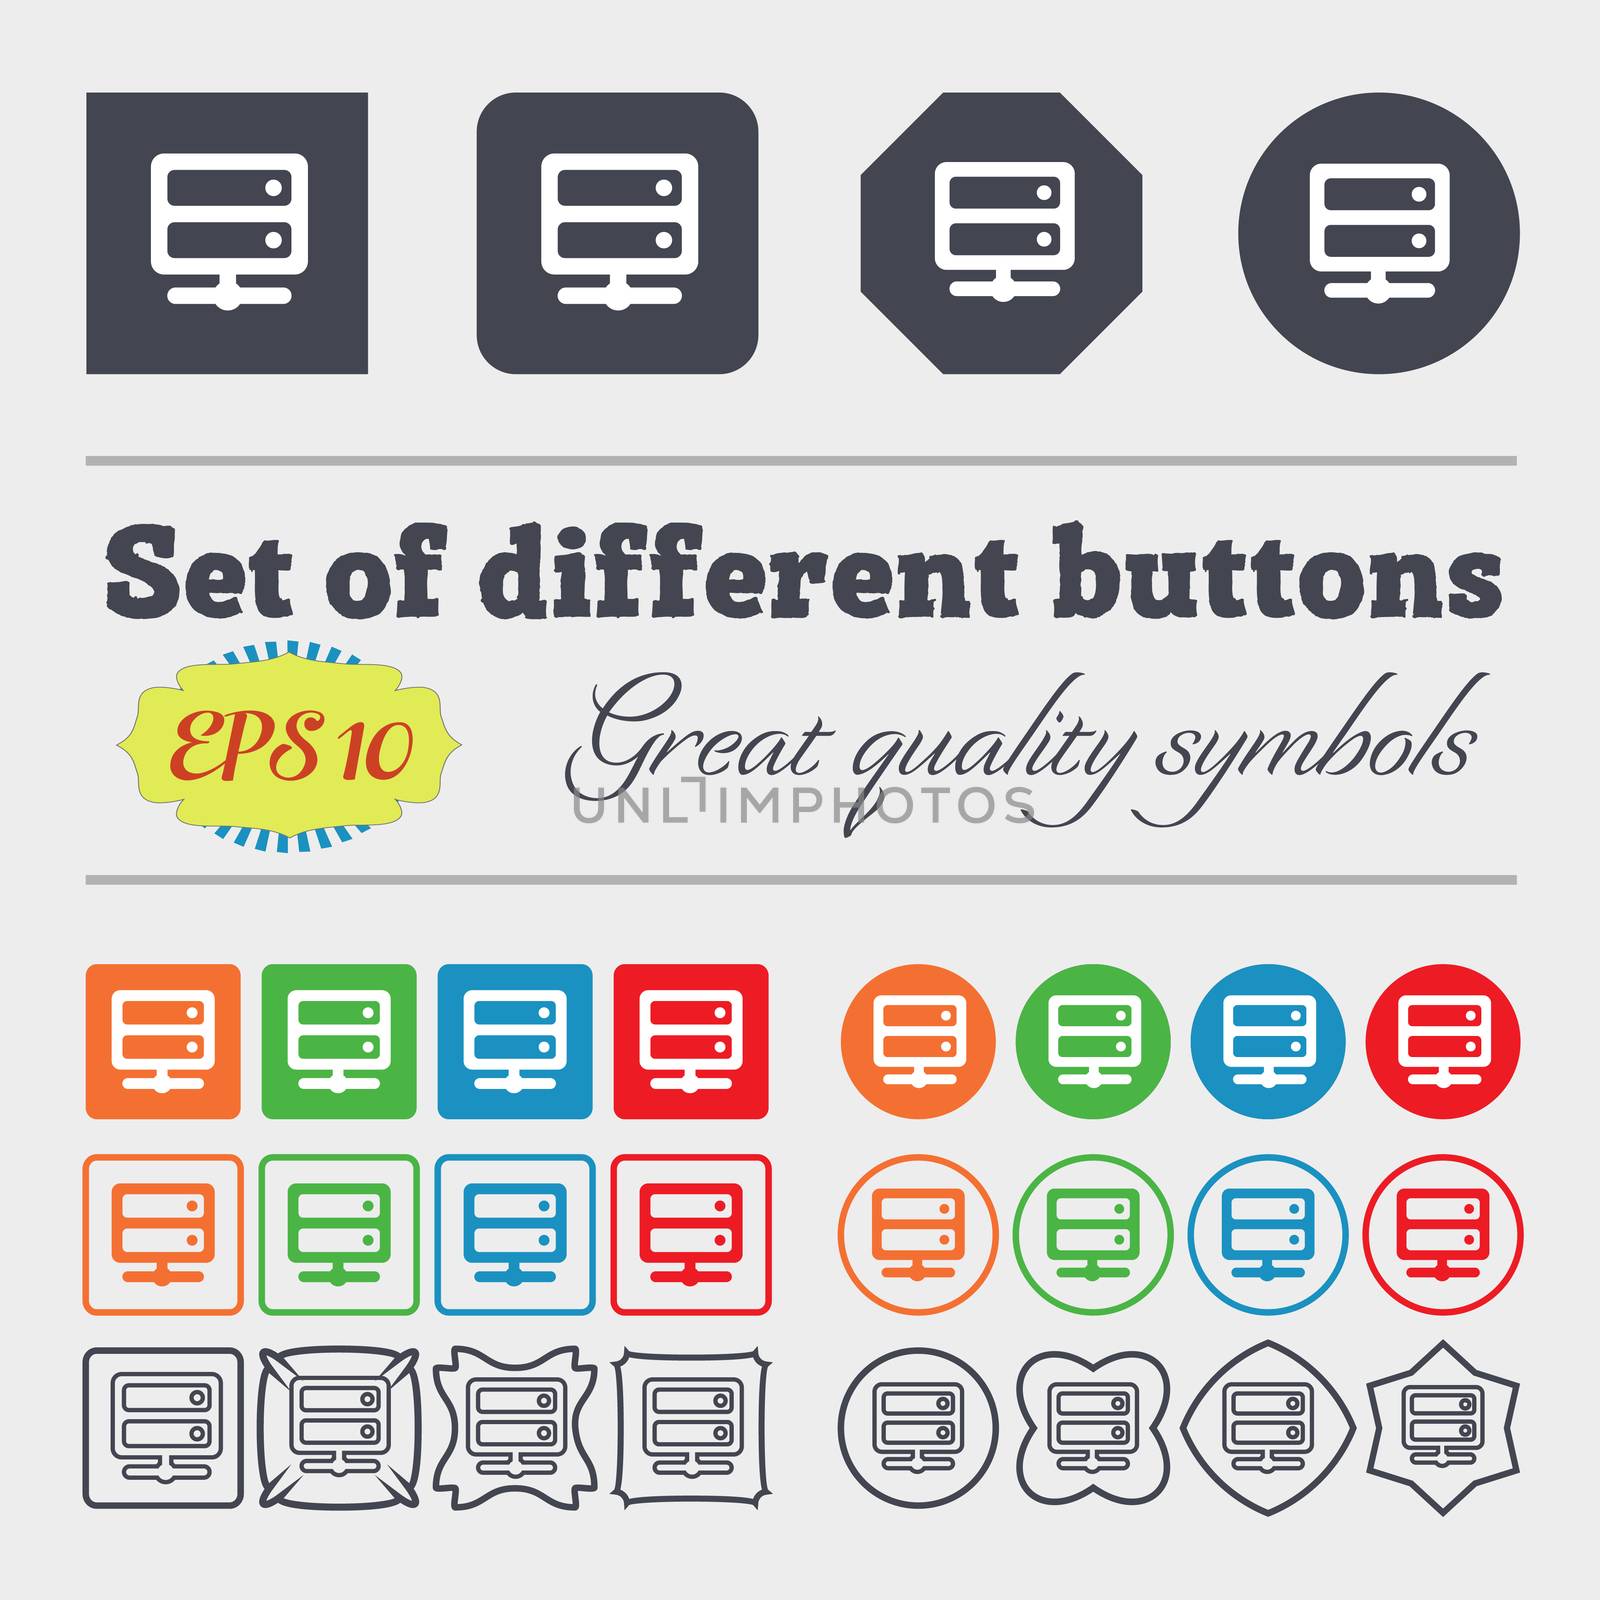 Server icon sign. Big set of colorful, diverse, high-quality buttons. illustration